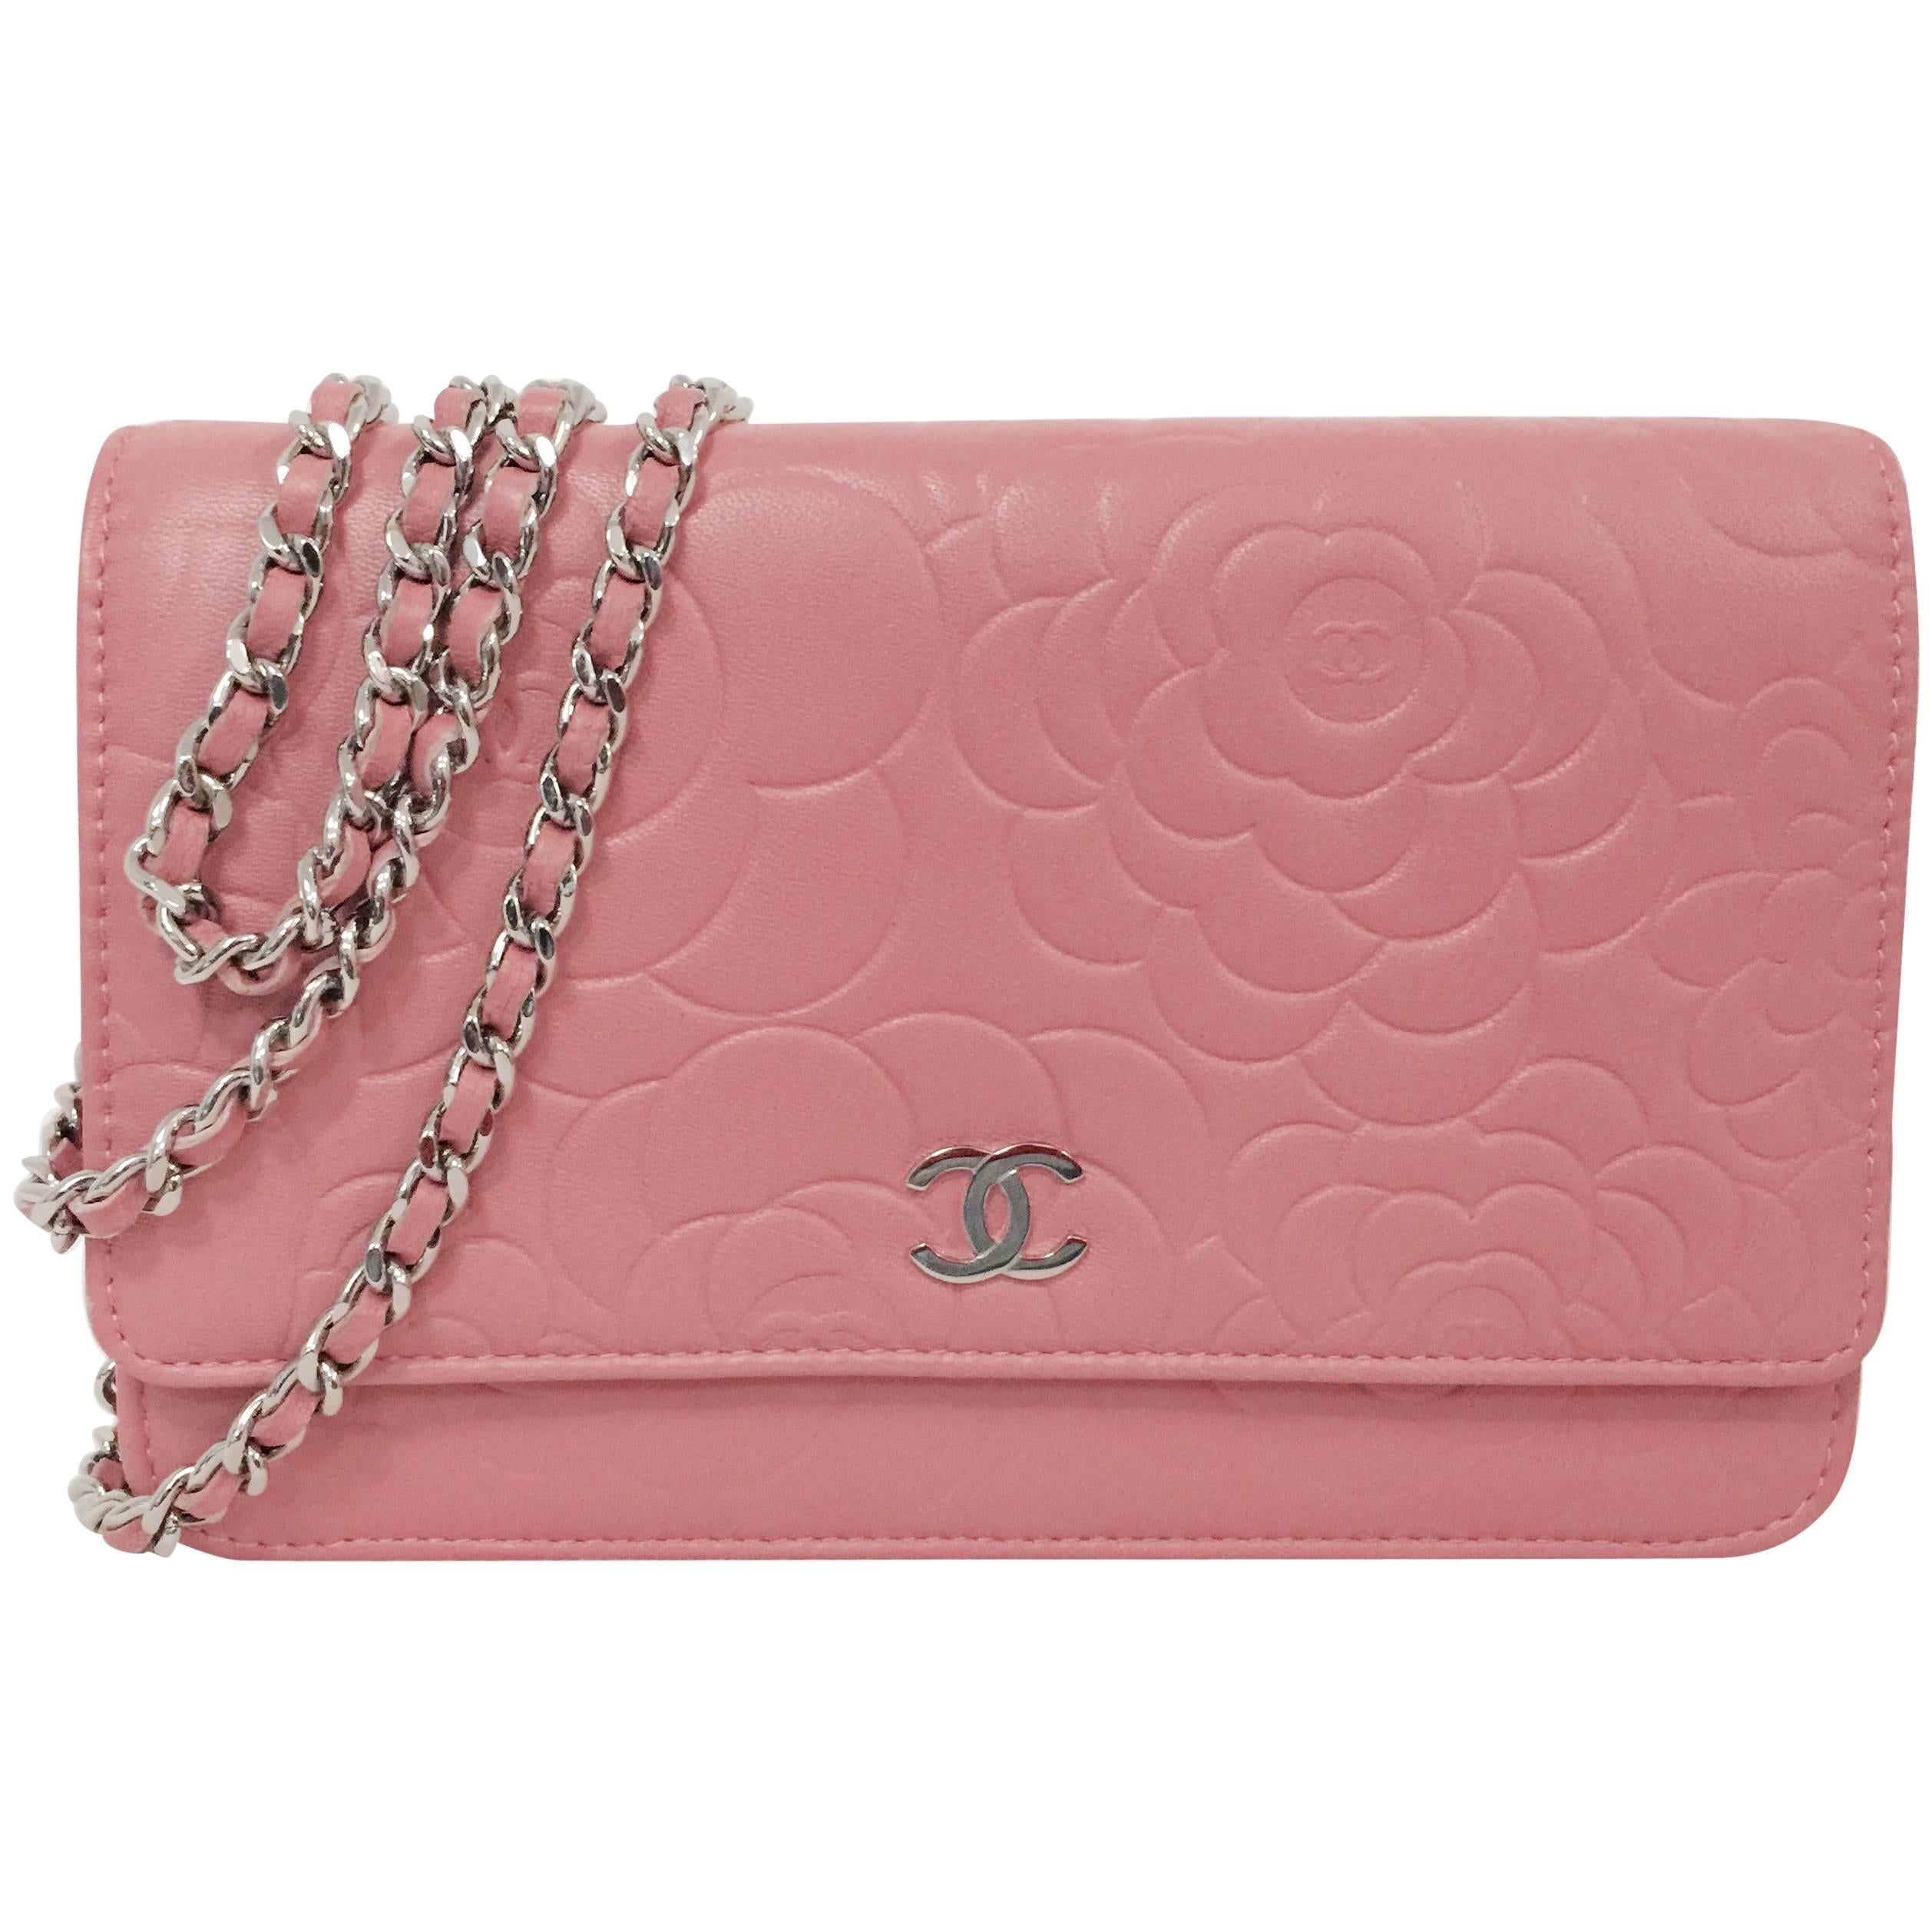 NEW Chanel Pink Camellia Embossed Lambskin Wallet/Chain Bag Serial 1480062